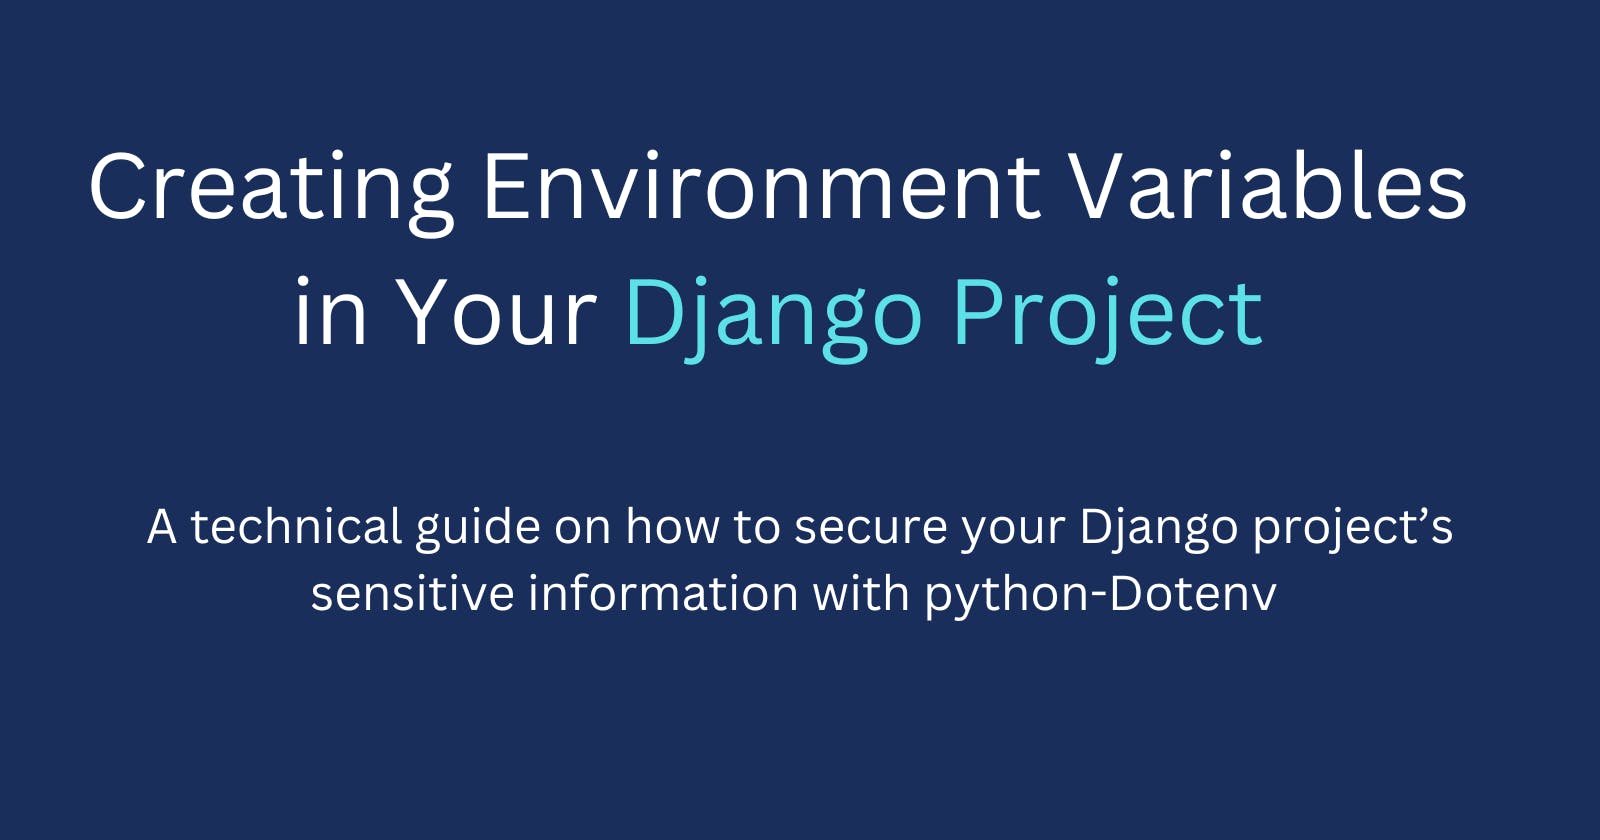 Creating Environment Variables in Your Django Project